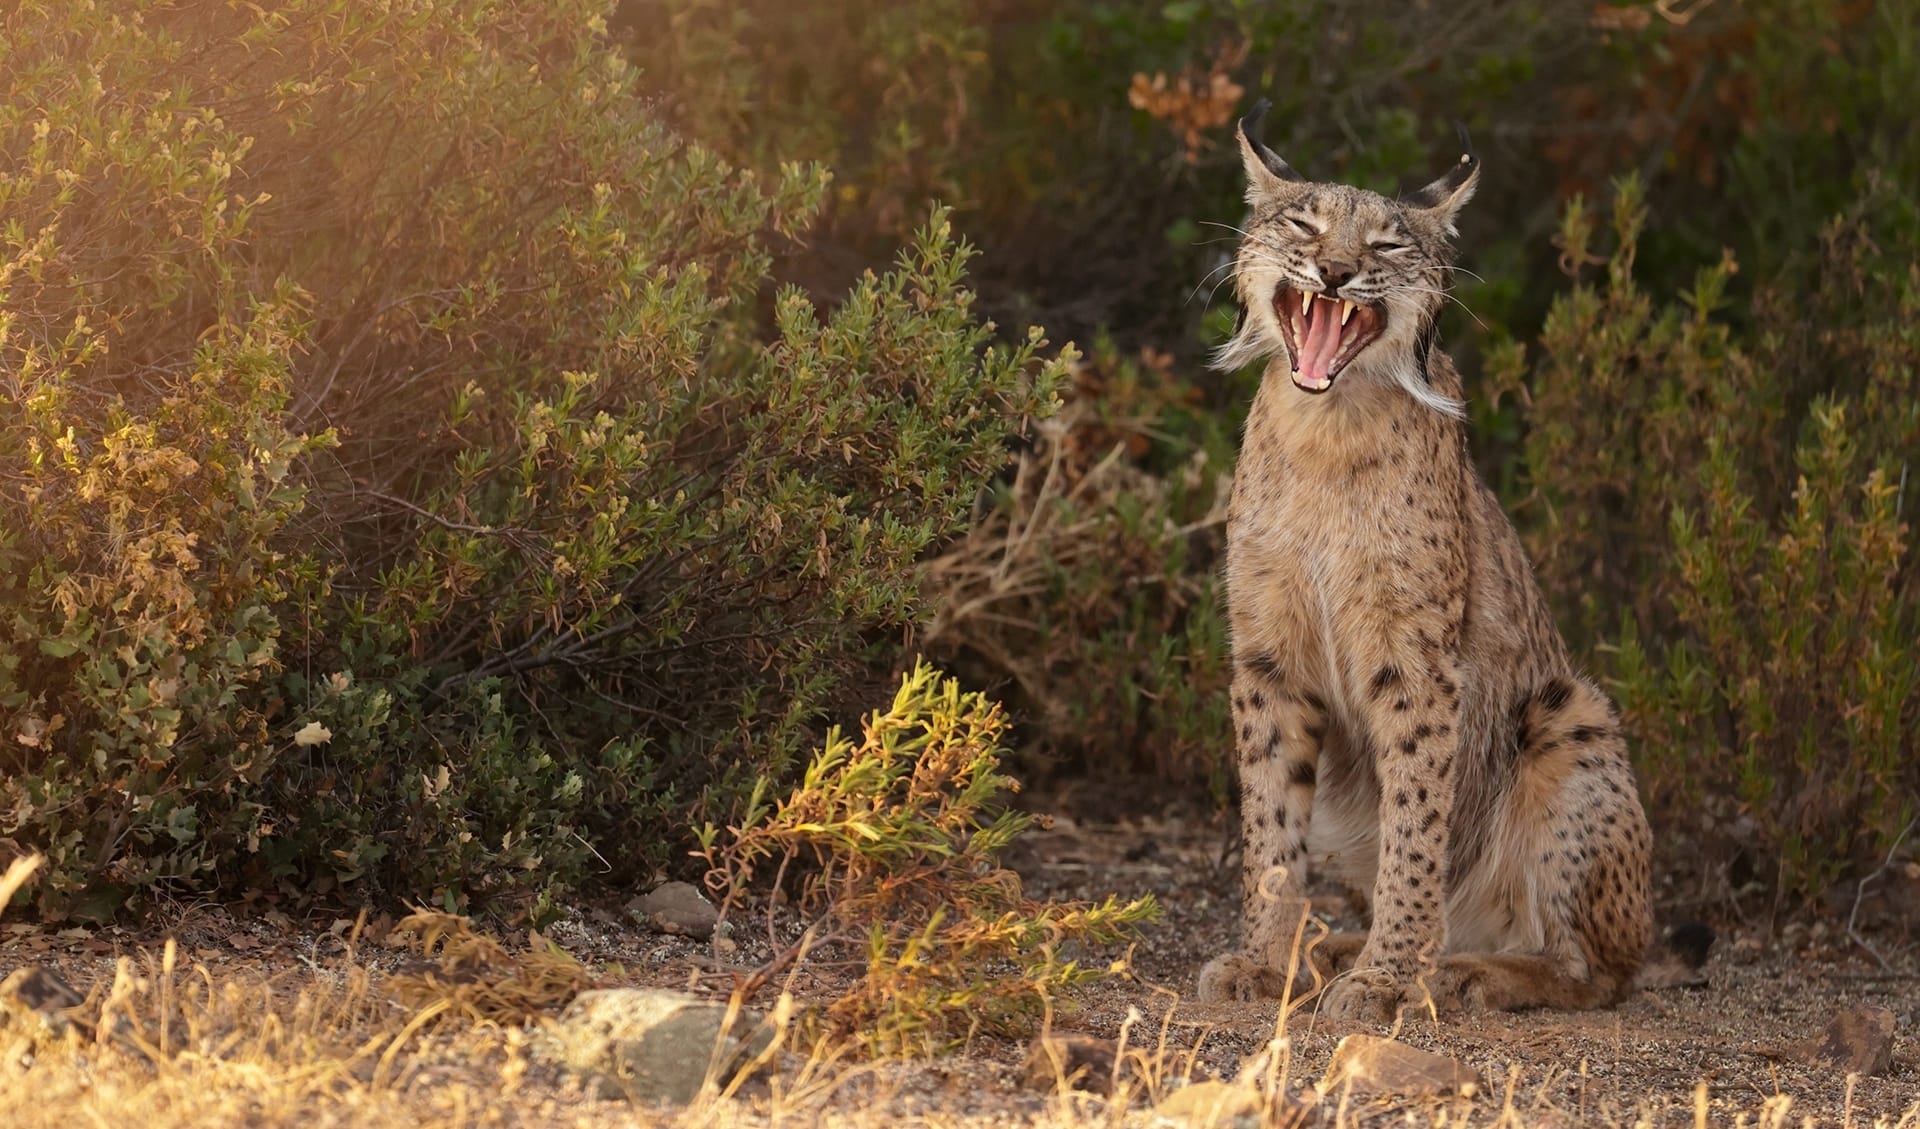 The Iberian lynx is one of the animals that can be seen on our wildlife watching trips.